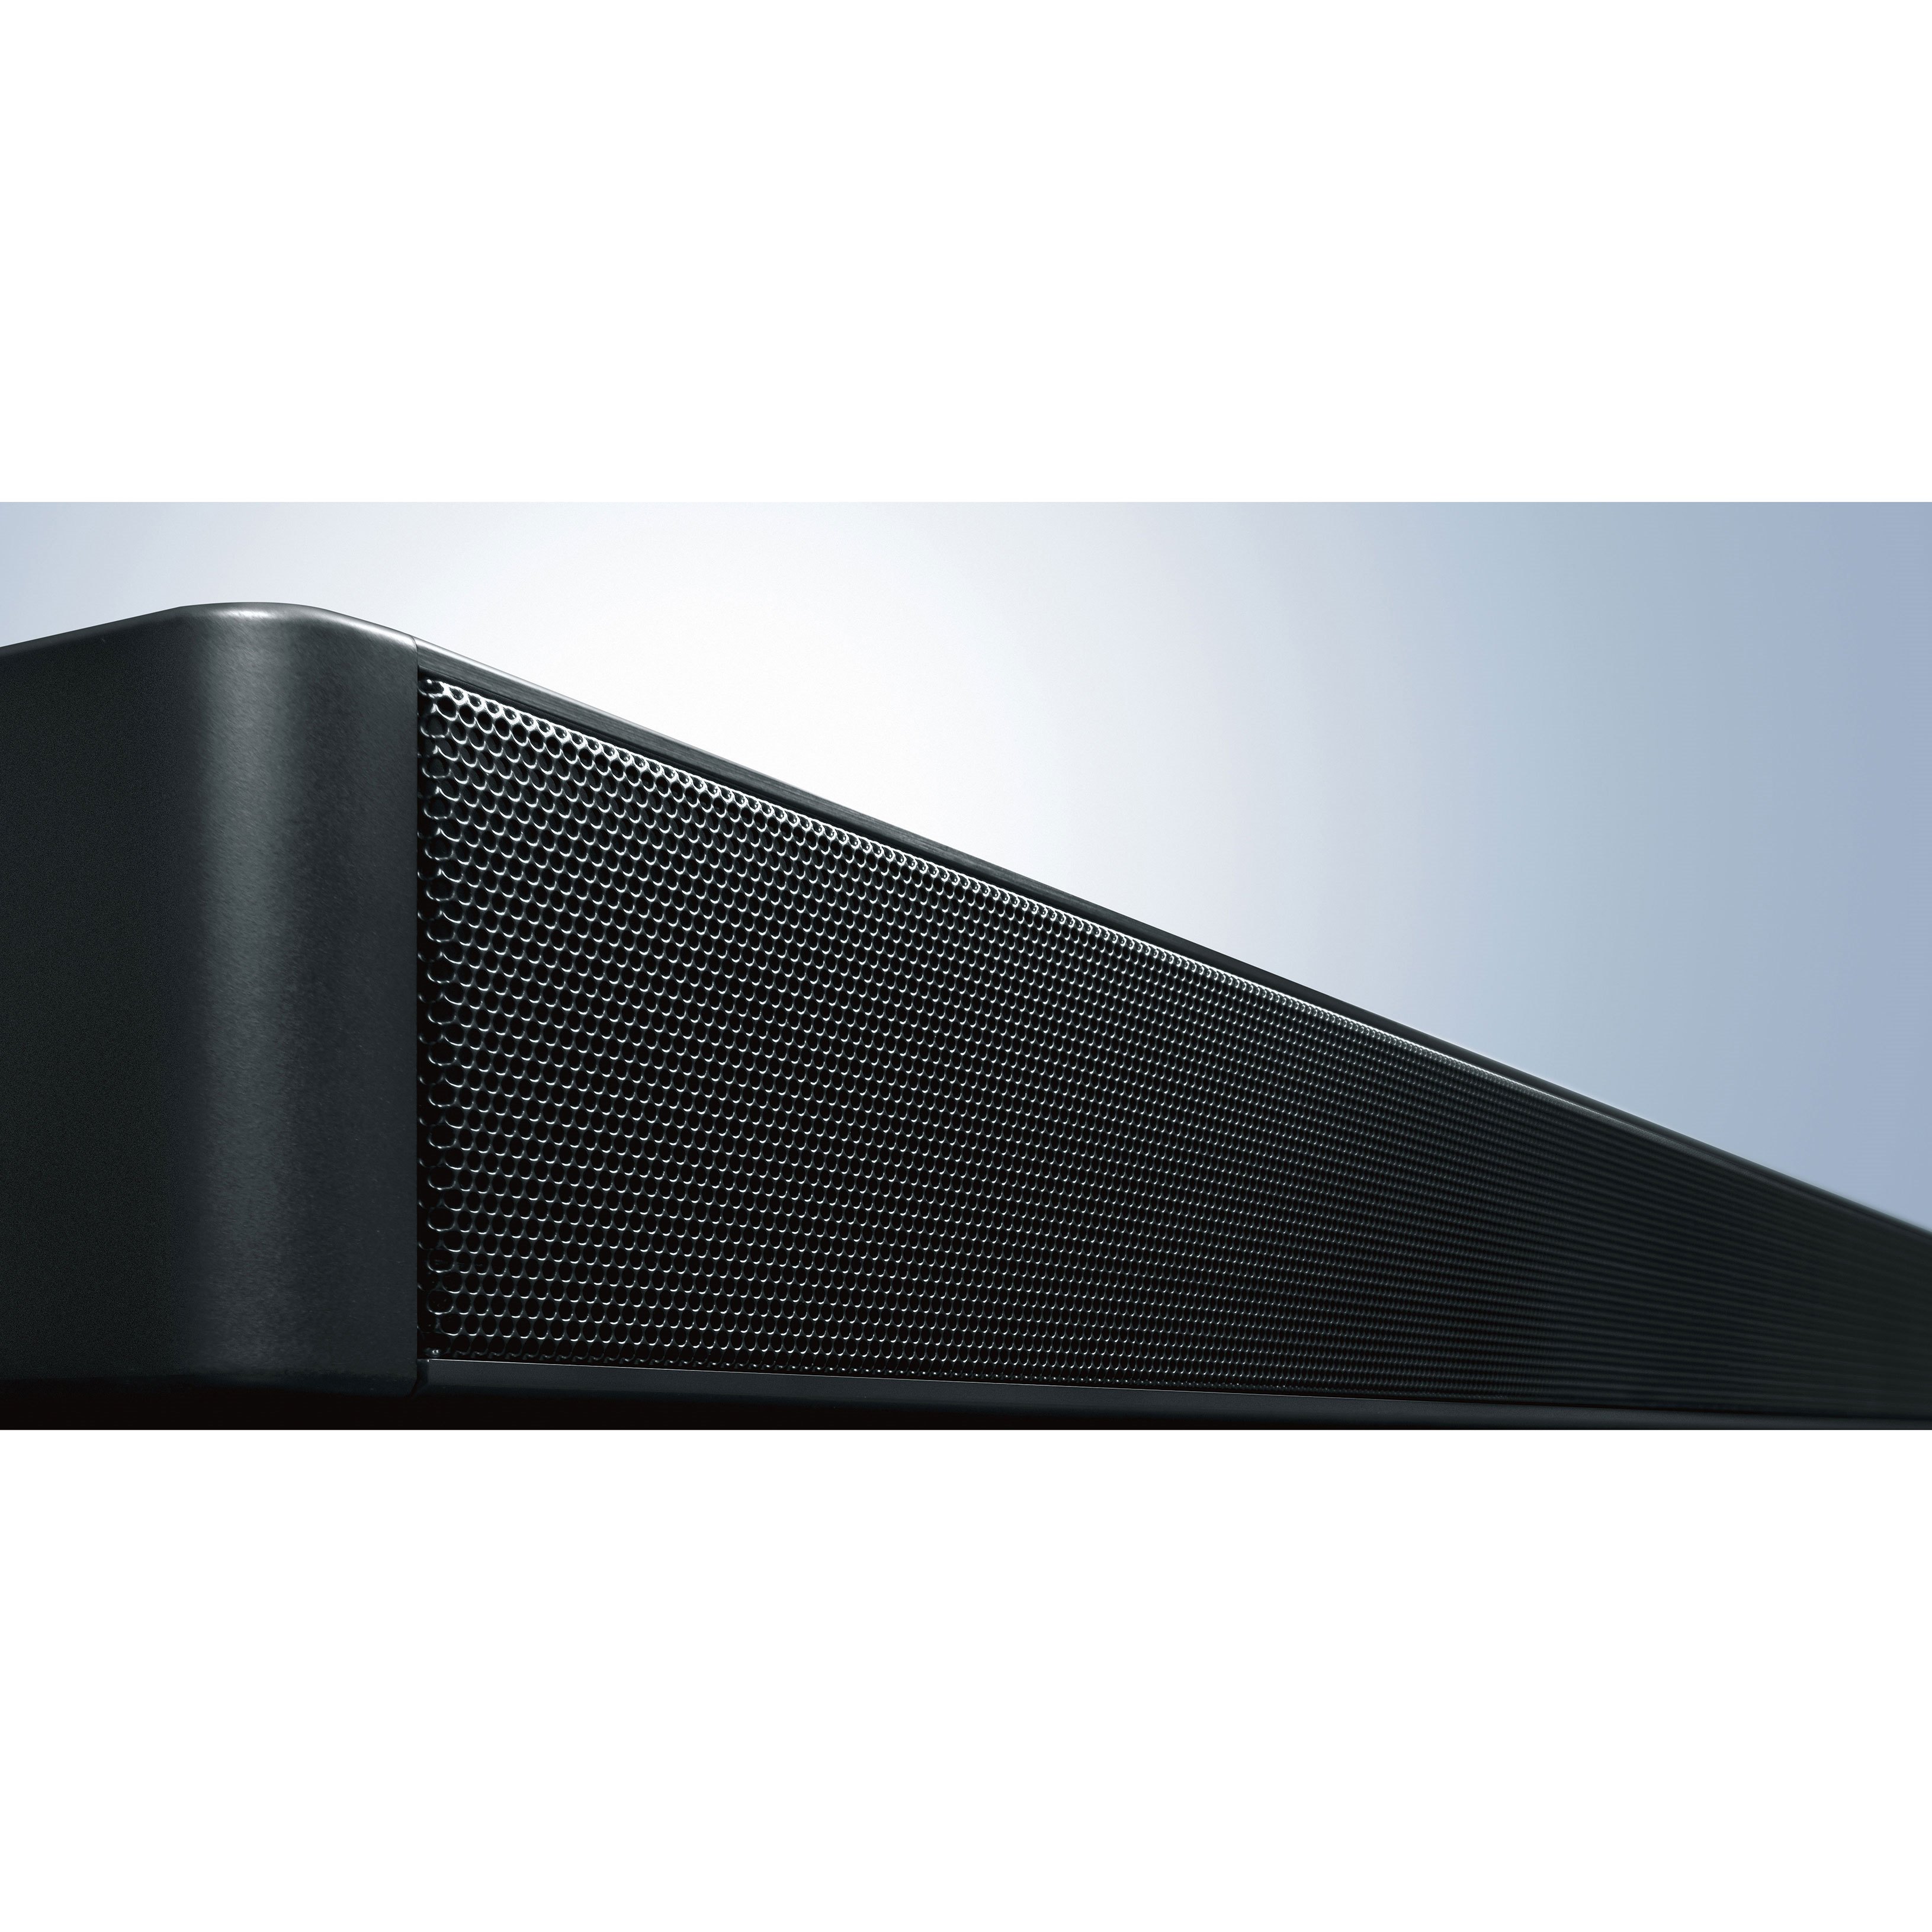 YSP-2700 - Overview - Sound Bars - Audio & Visual - Products